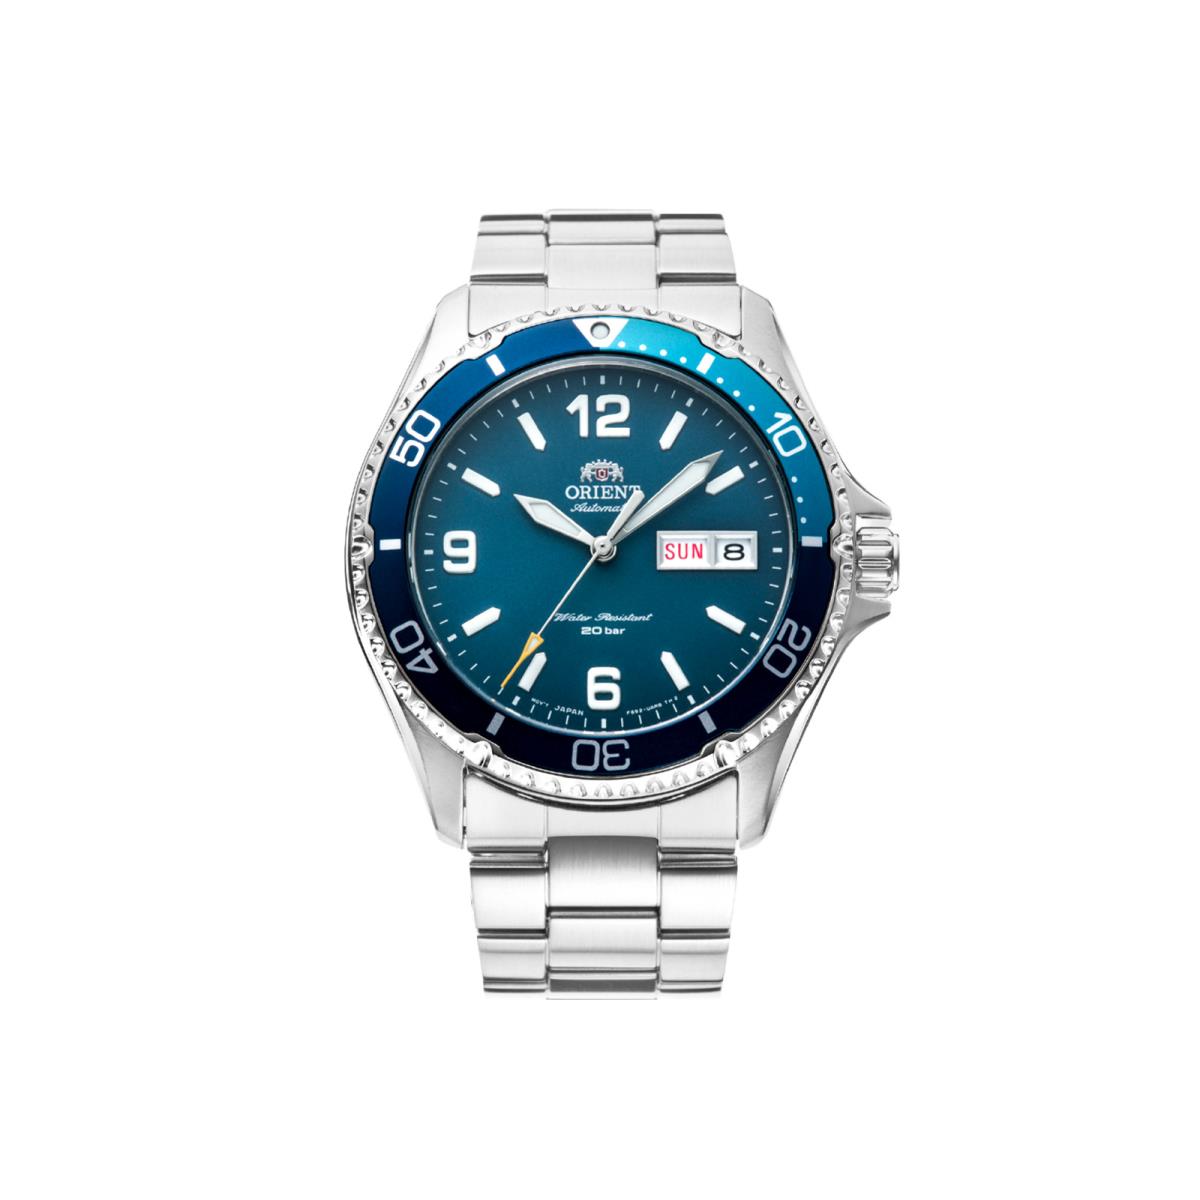 Orient Mako-3 Japanese Automatic 200m Diver Watch with Sapphire Crystal Blue - RA-AA0818L19B